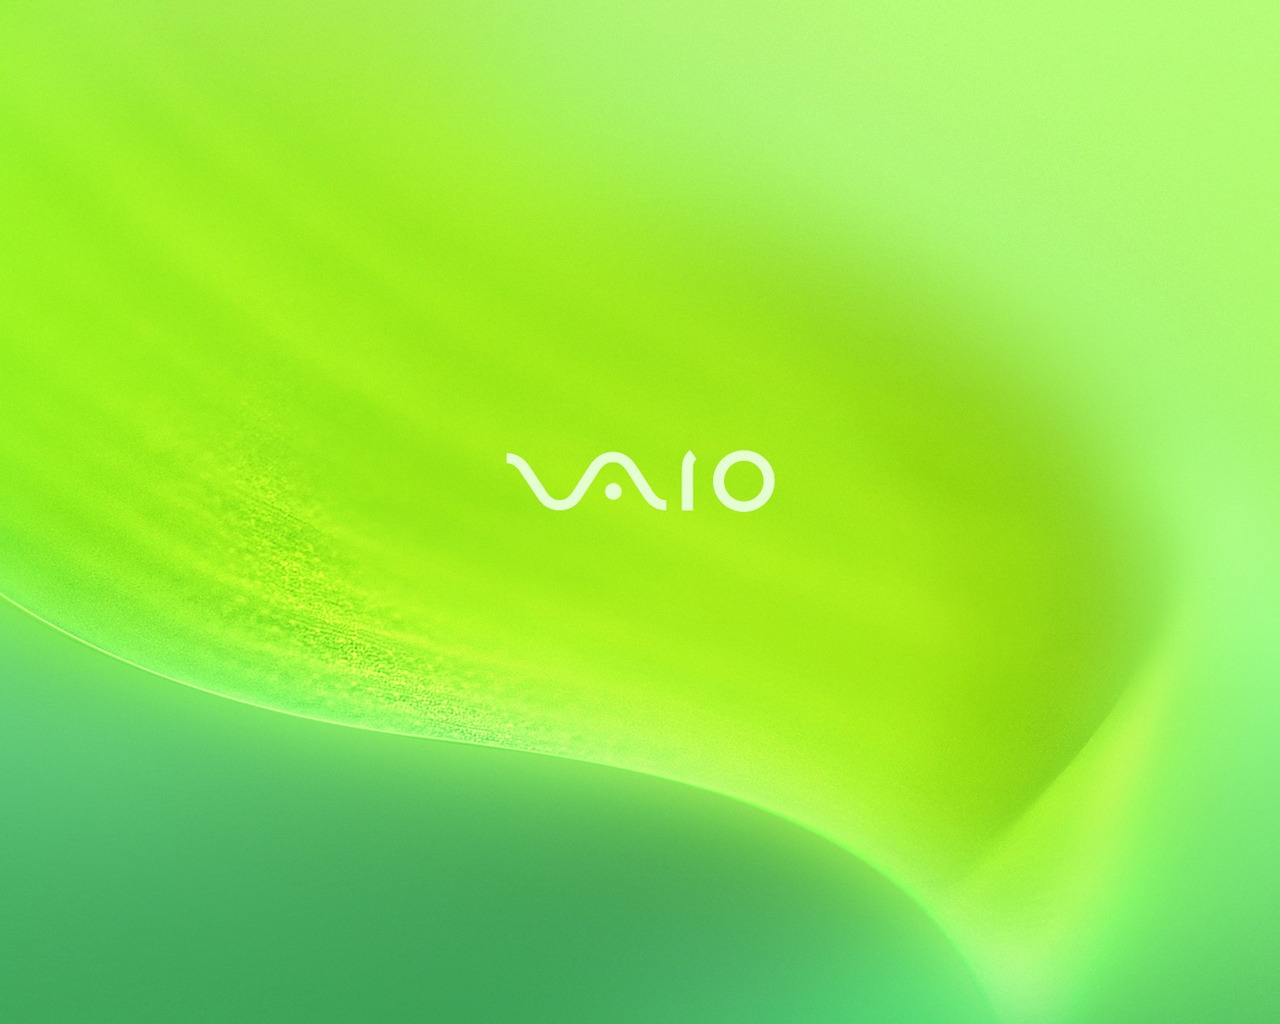 Vaio Green Leaf for 1280 x 1024 resolution